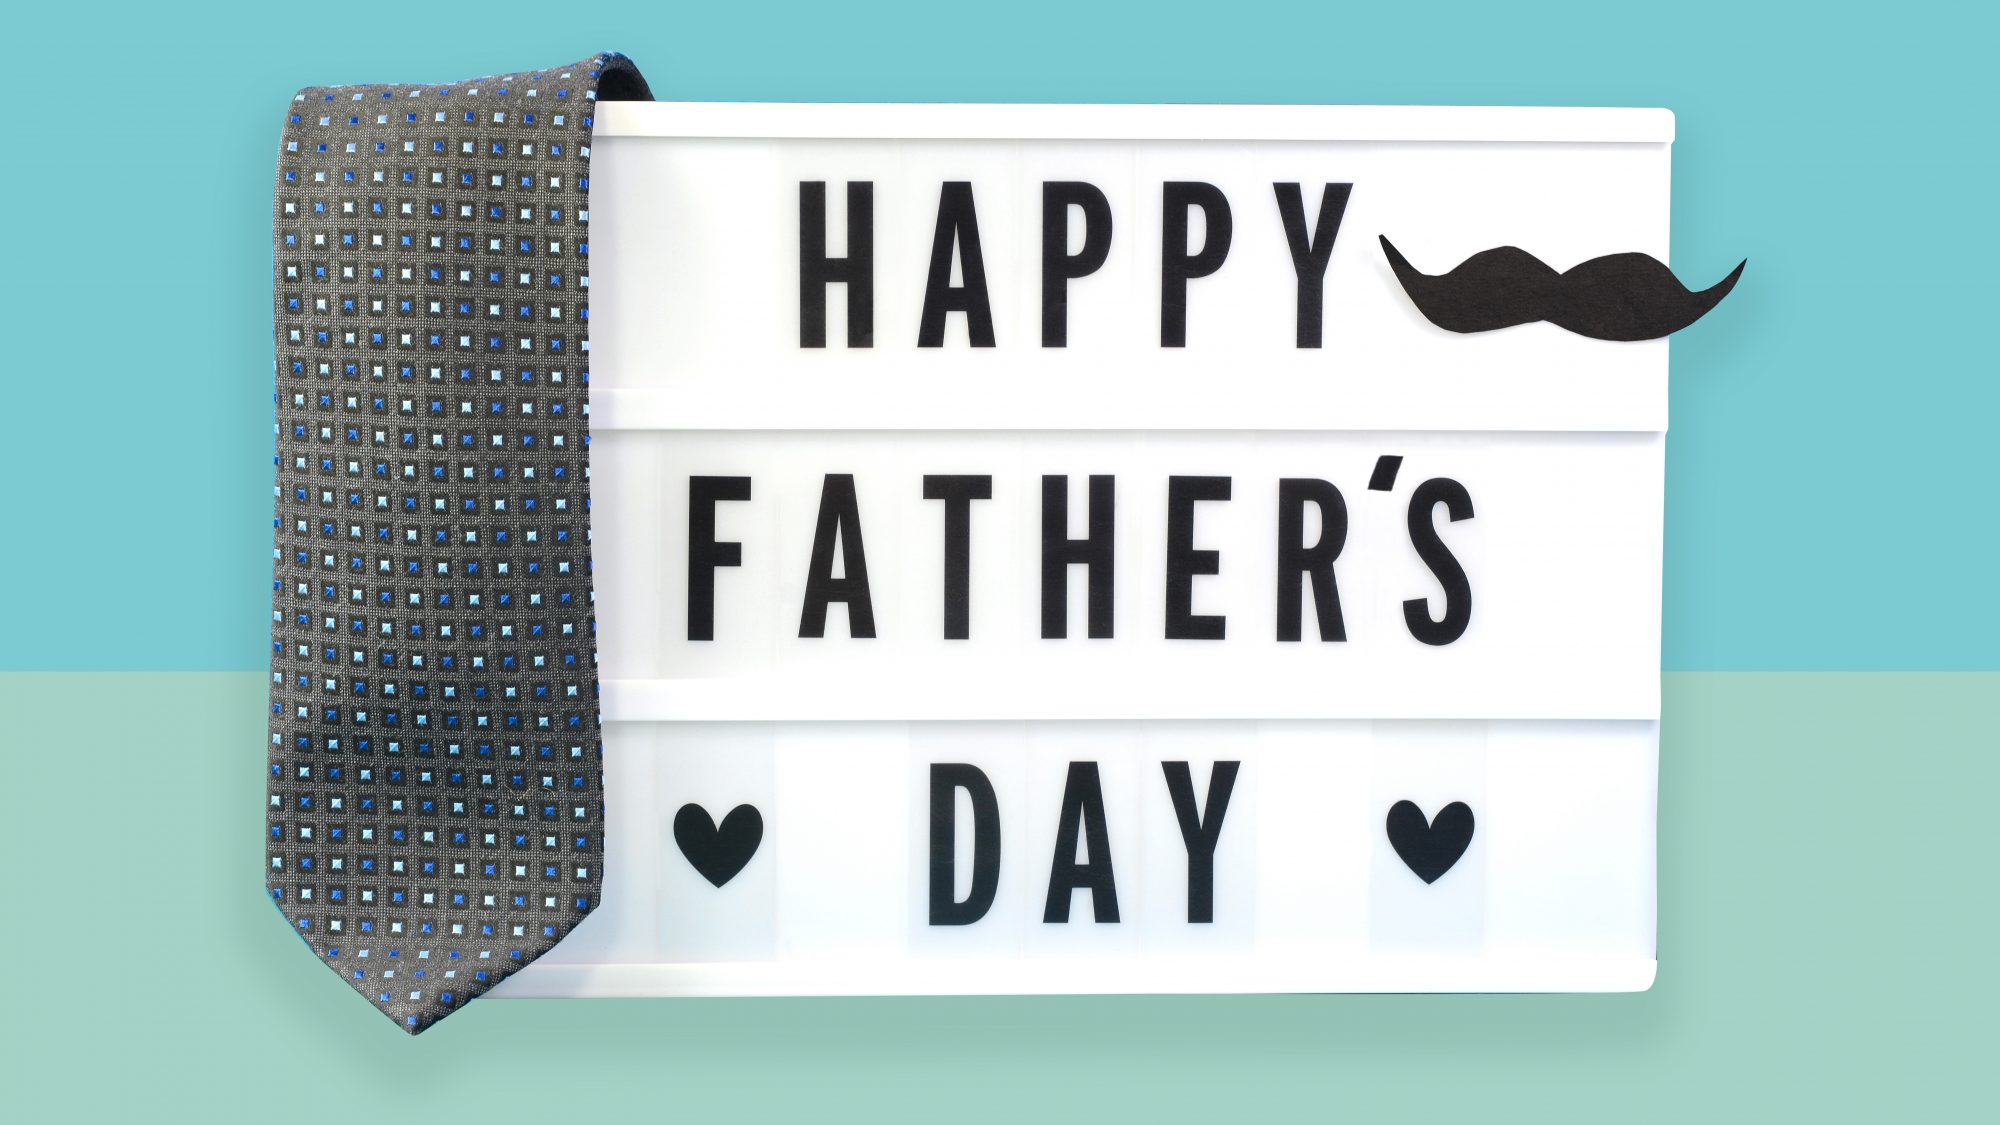 Types Of Gifts That That Would Make Dads Happy on Father’s Day